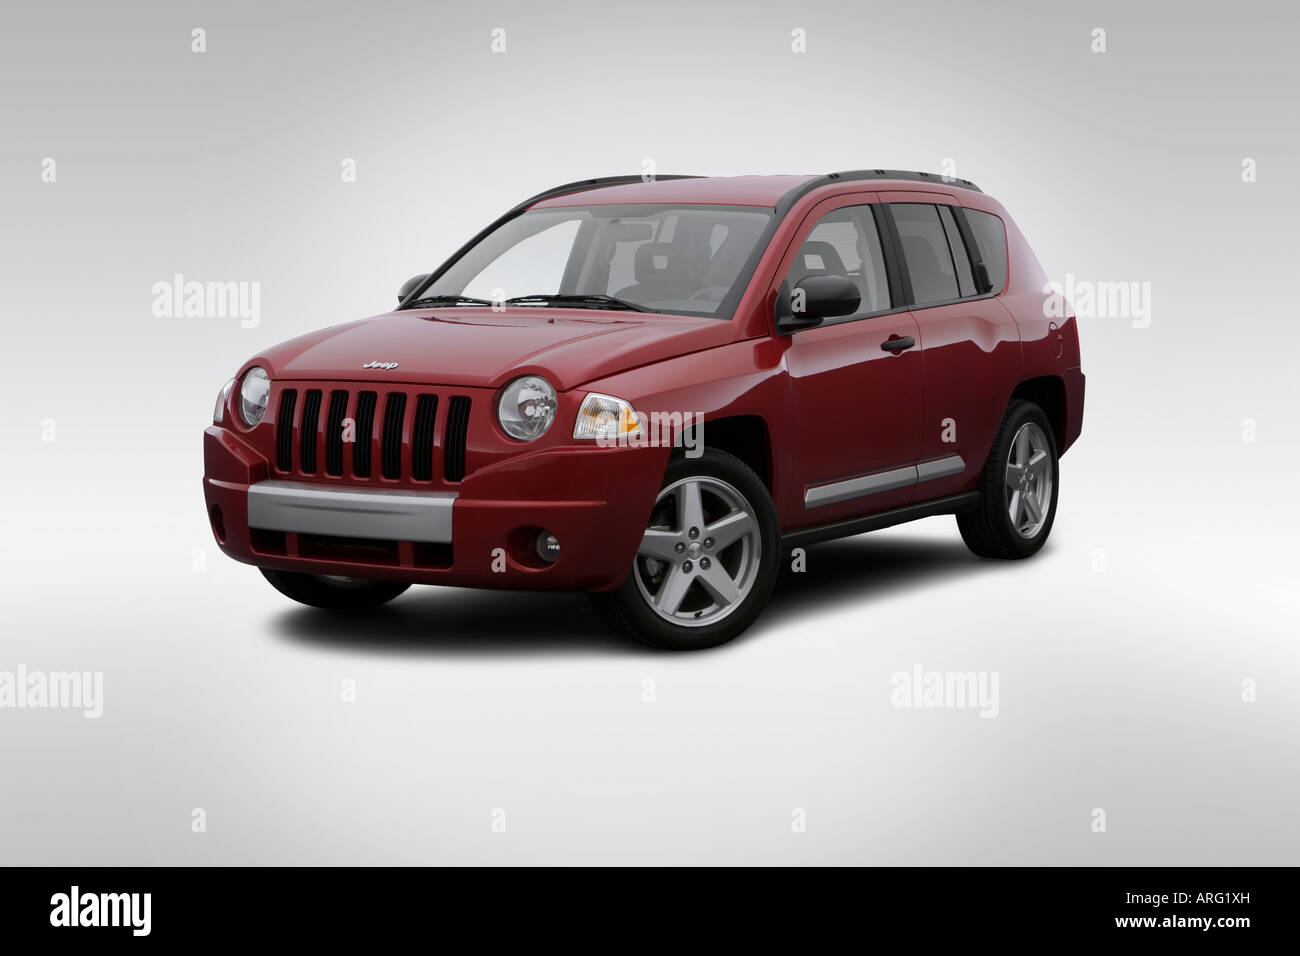 2007 Jeep Compass Limited in Red - Front angle view Stock Photo - Alamy